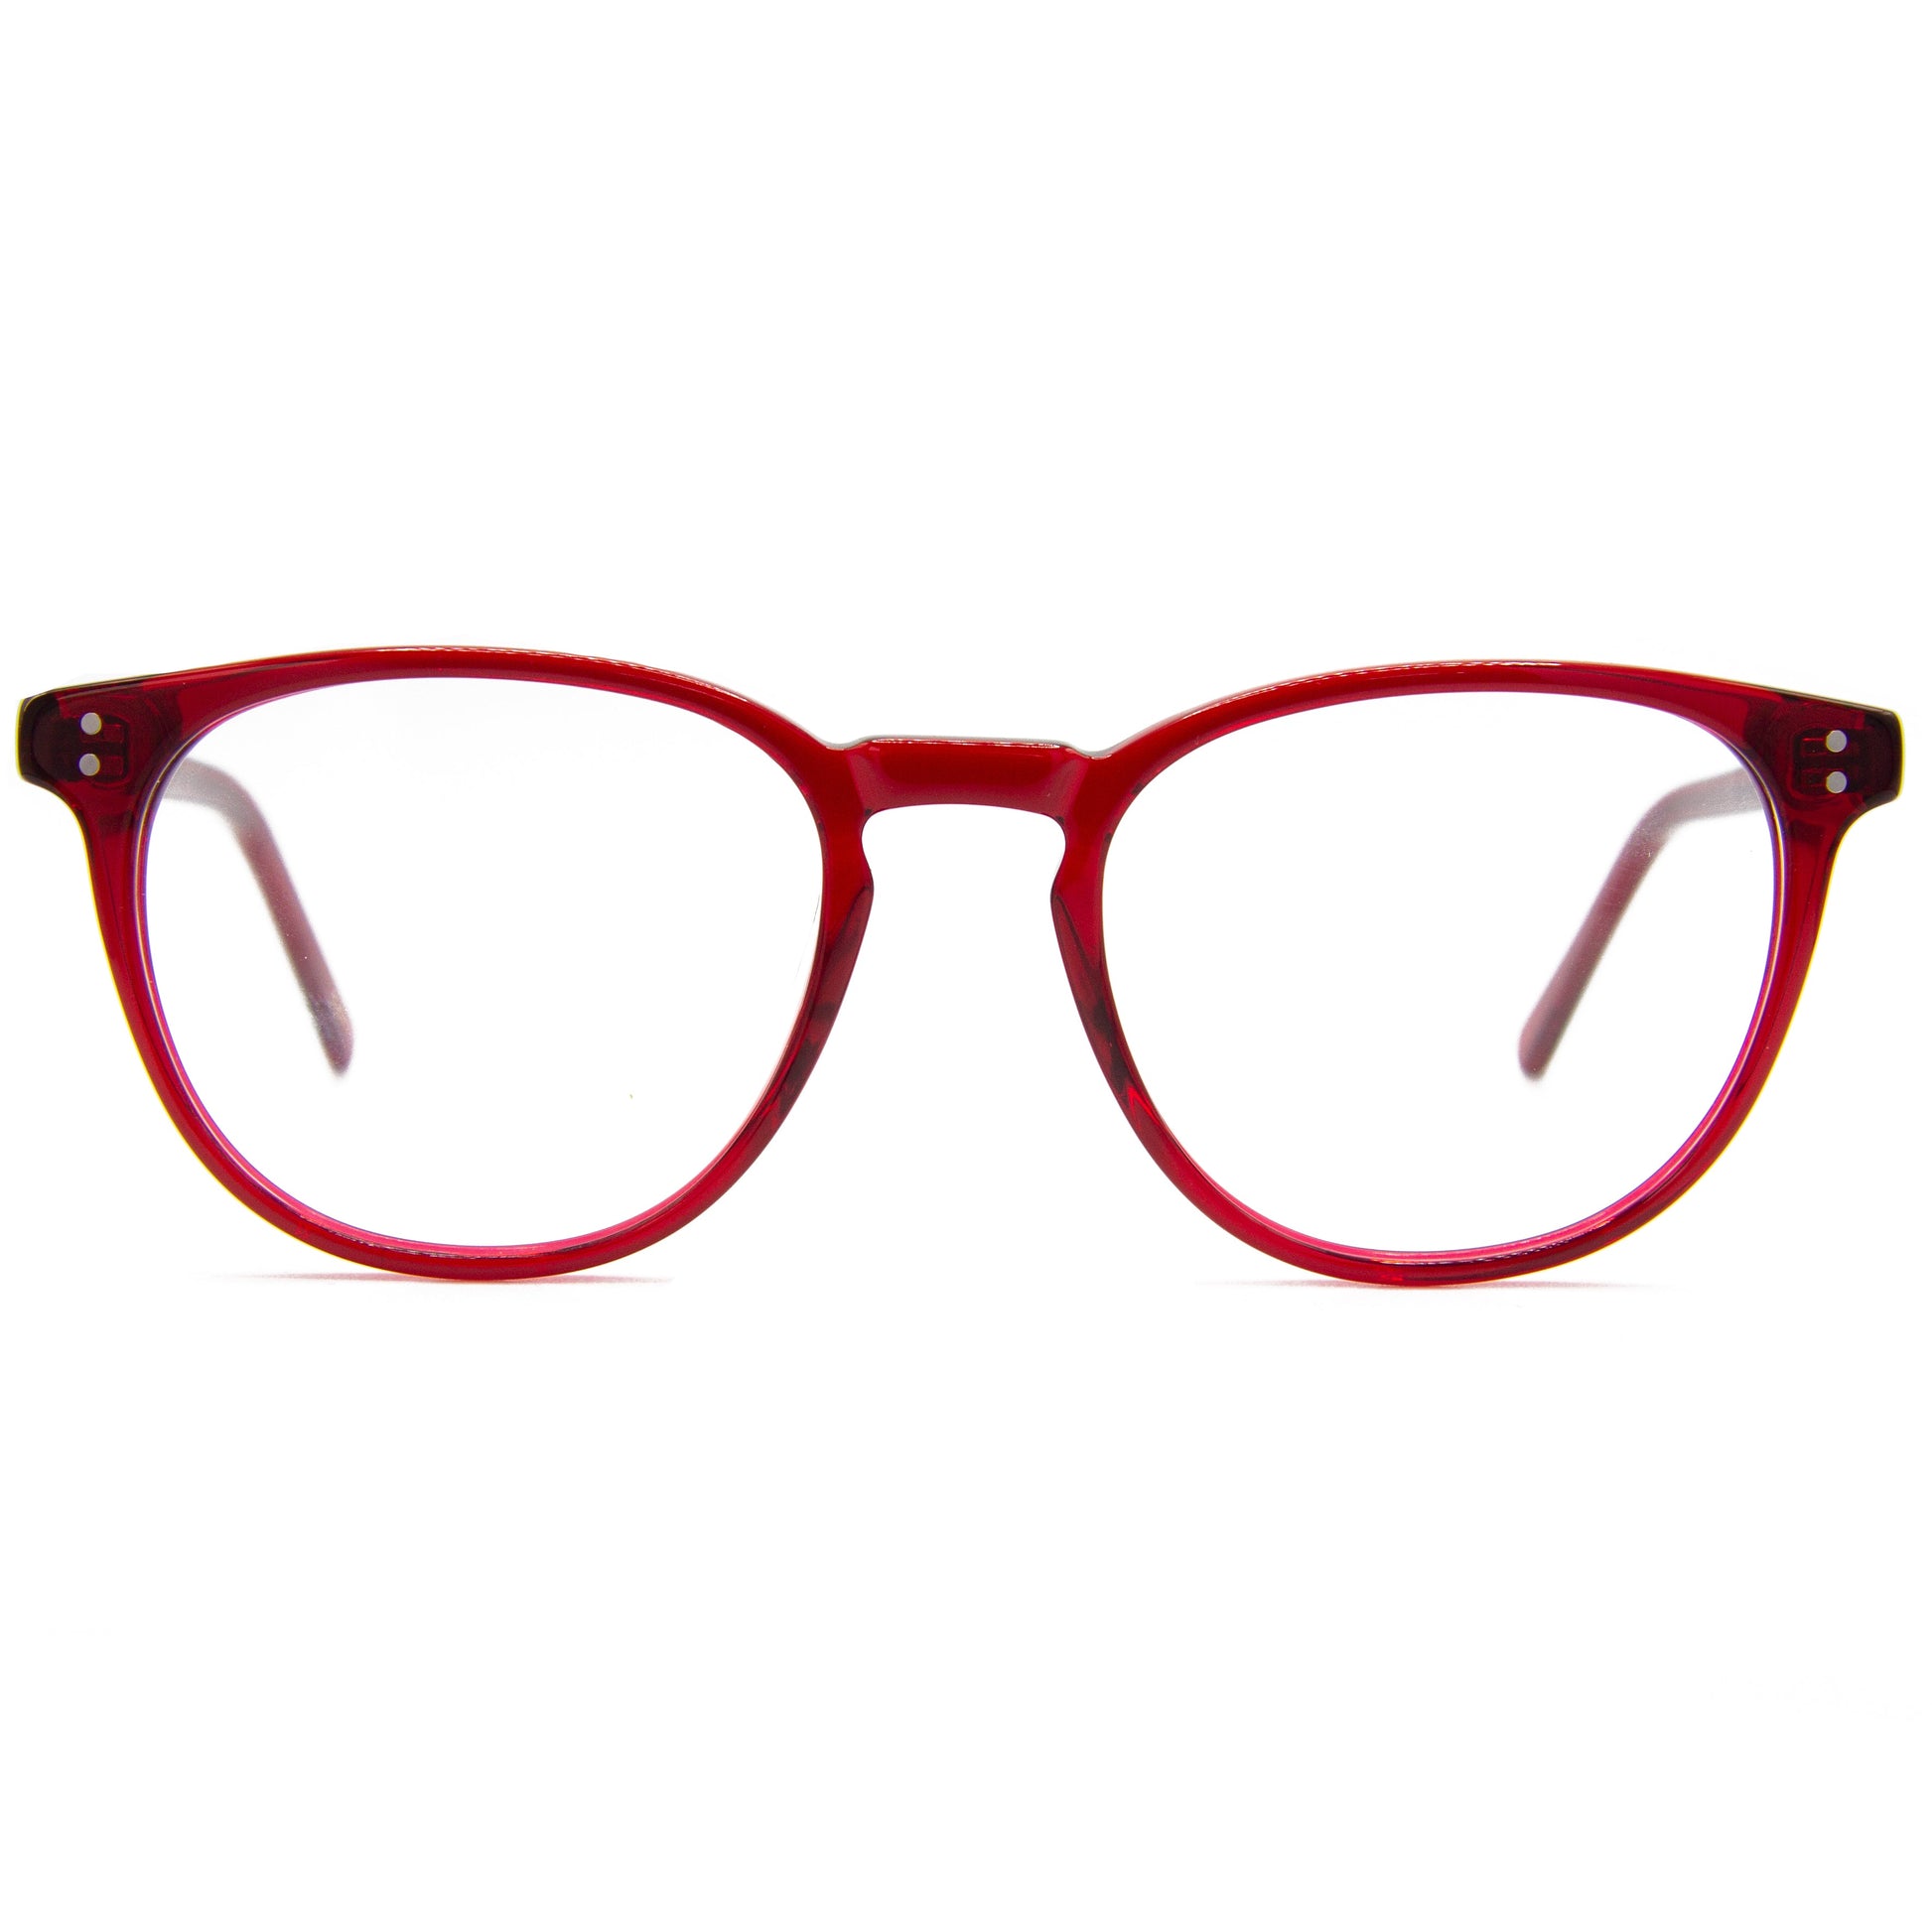  3 brothers - Ant - Red - Prescription Glasses